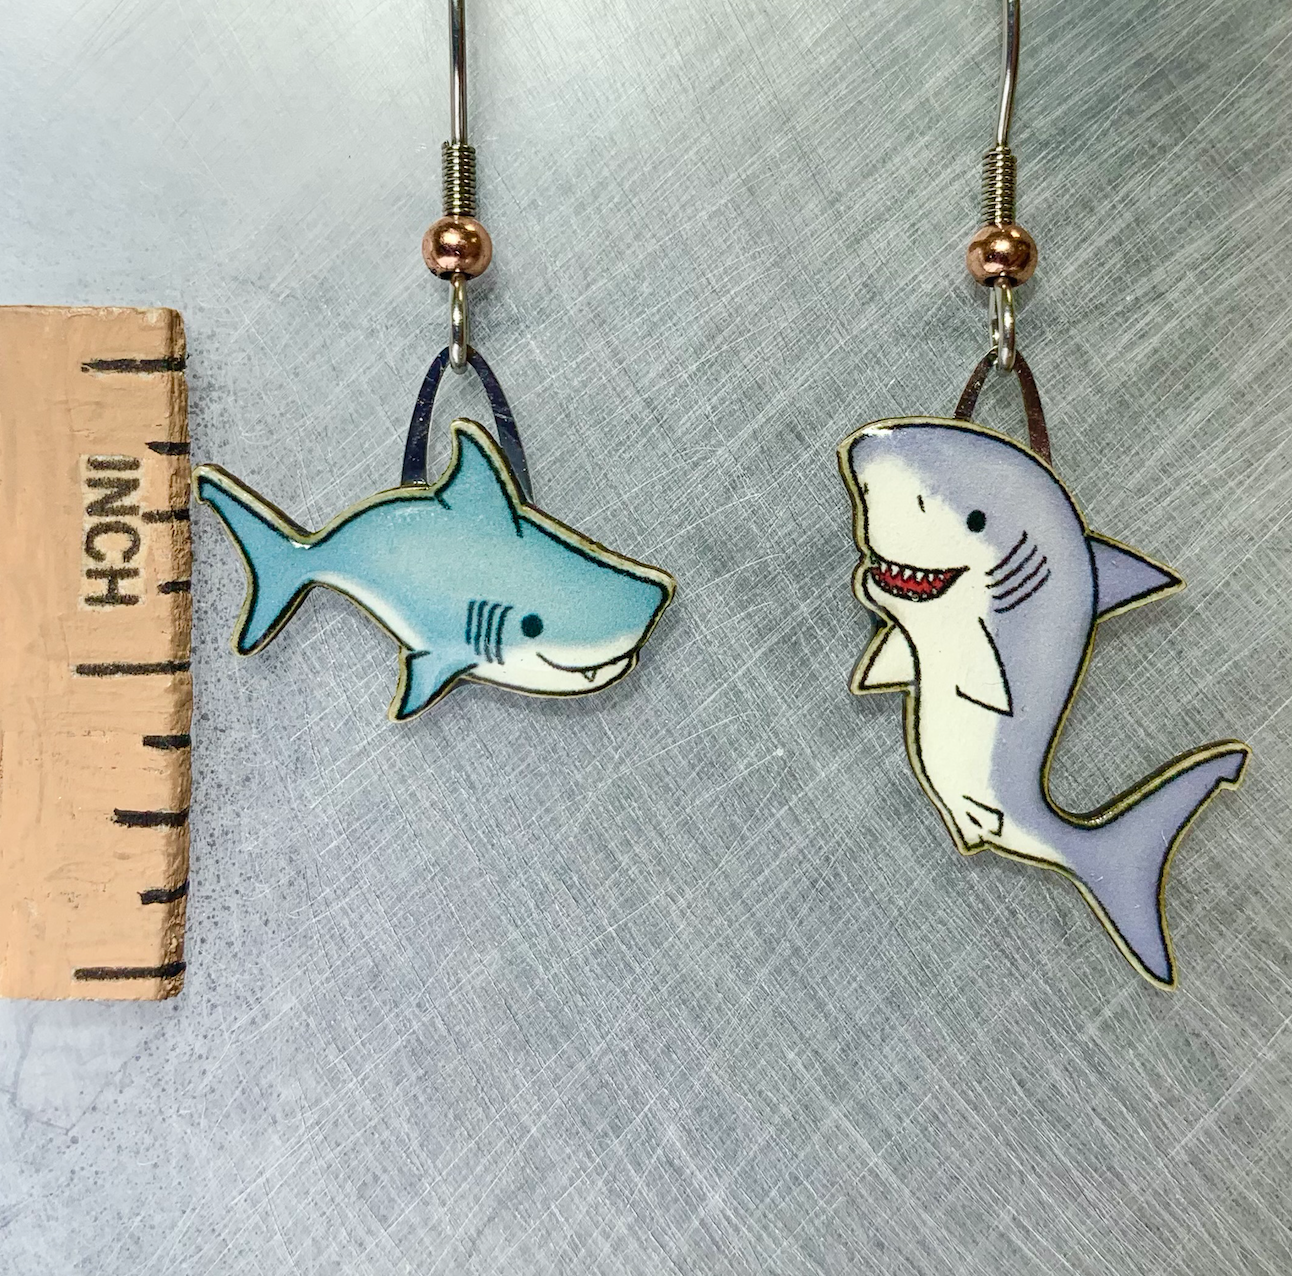 Picture shown is of 1 inch tall pair of earrings of the marine animal the Baby Shark & Mama.